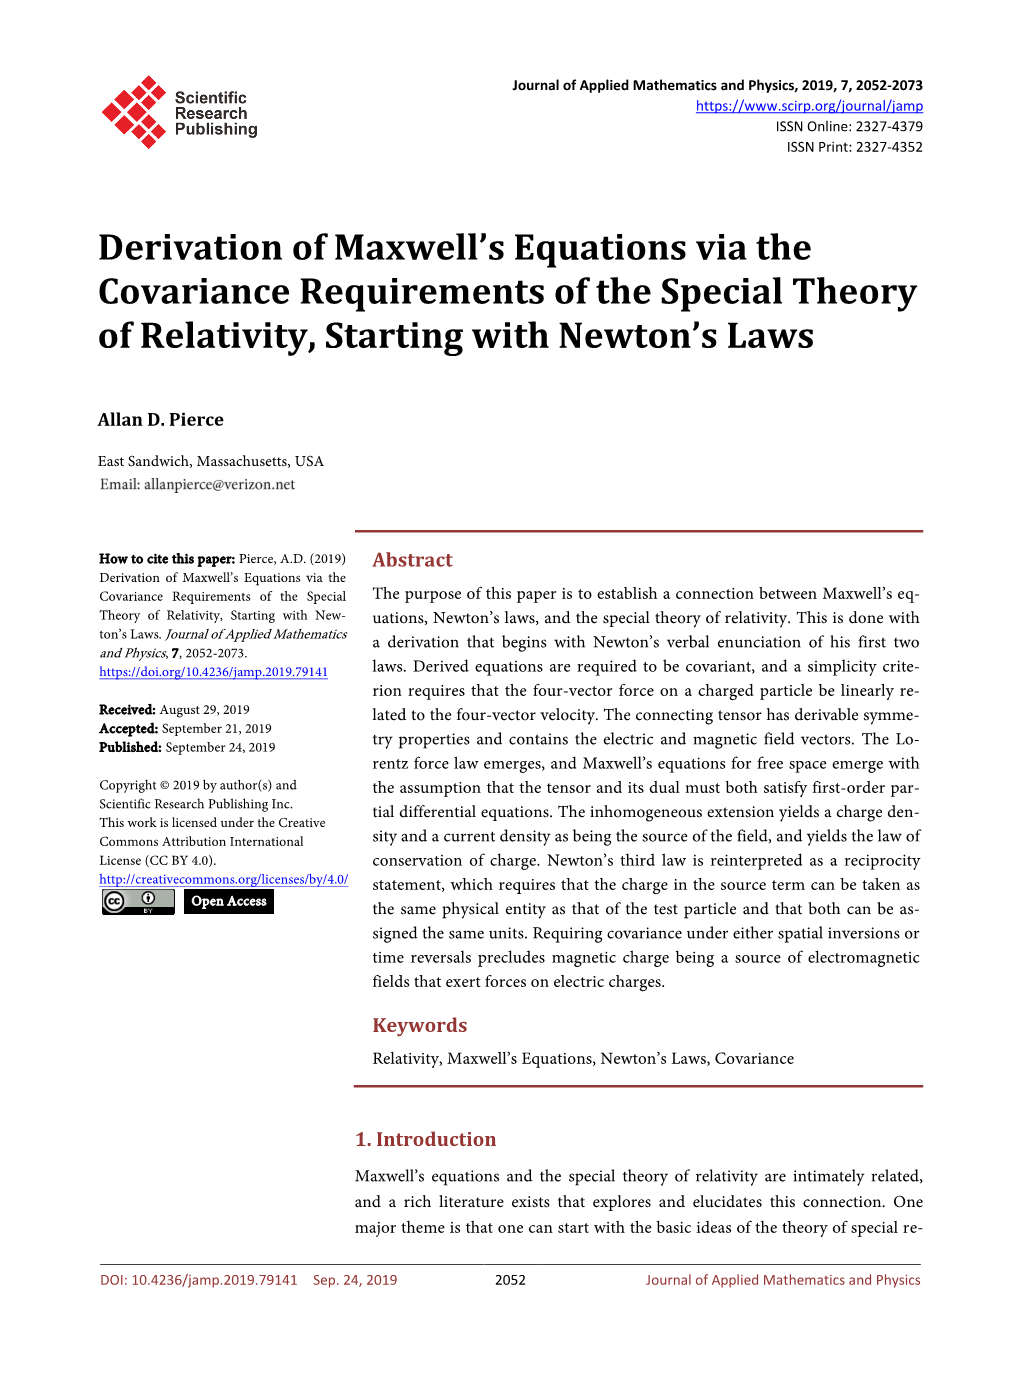 Derivation of Maxwell's Equations Via the Covariance Requirements Of